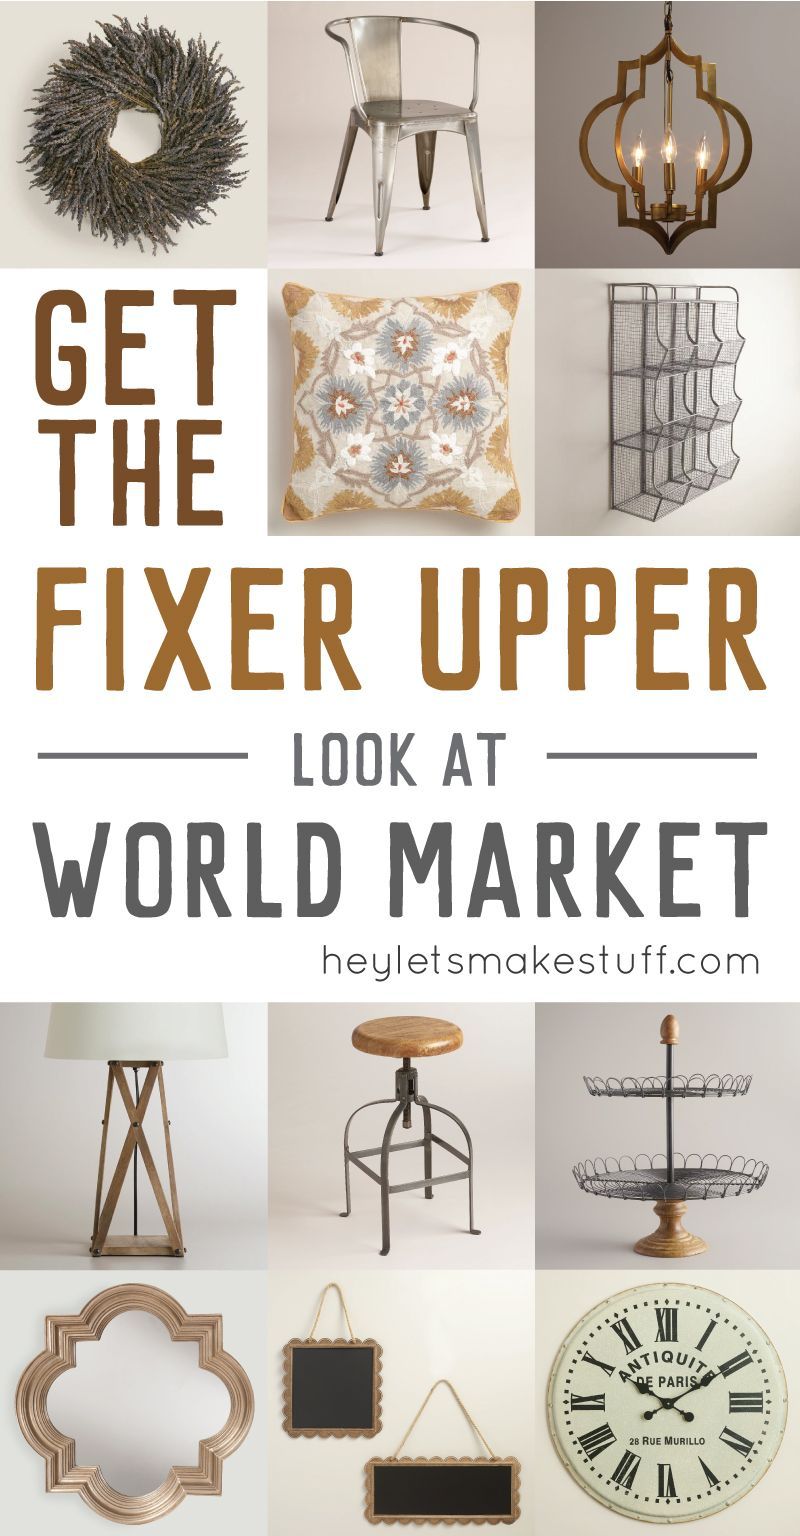 How to Get the Fixer Upper Look at World Market -   25 hgtv decor
 ideas